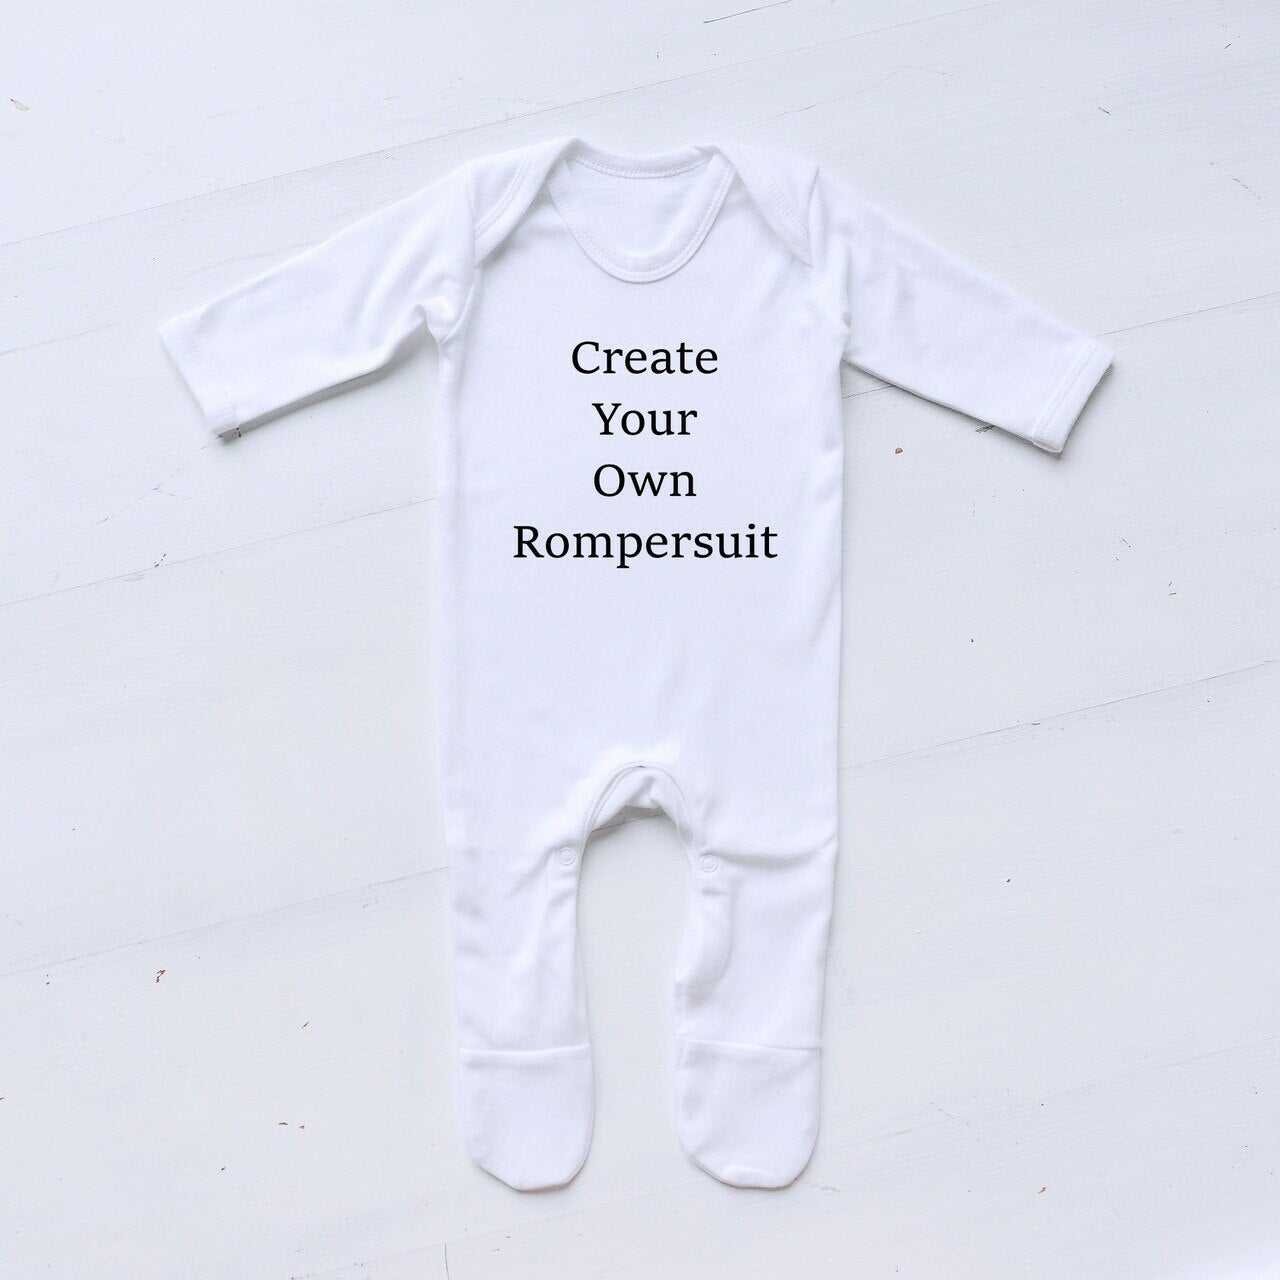 Create Your Own Rompersuit